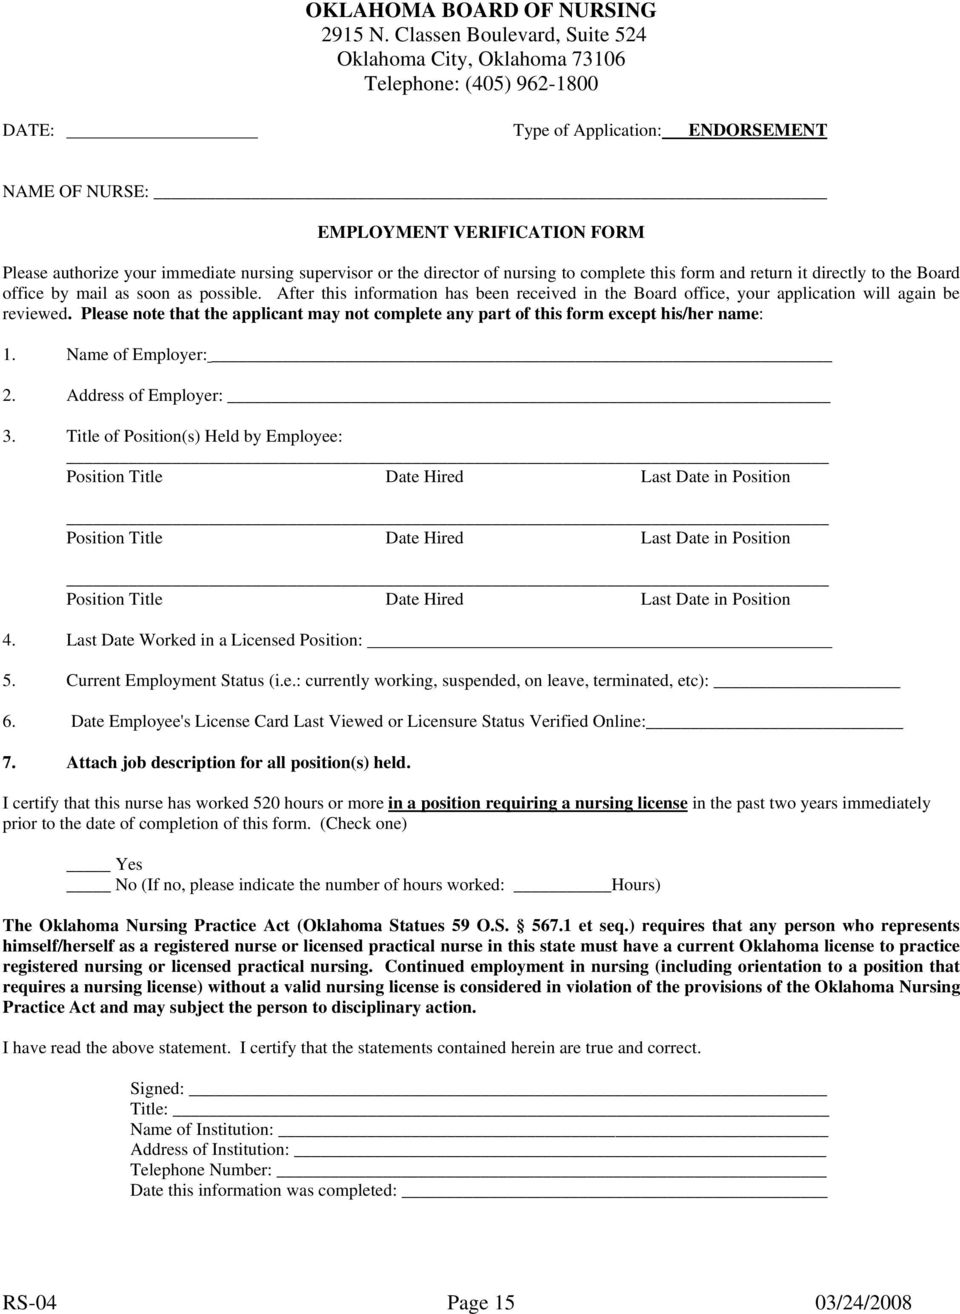 nursing supervisor or the director of nursing to complete this form and return it directly to the Board office by mail as soon as possible.